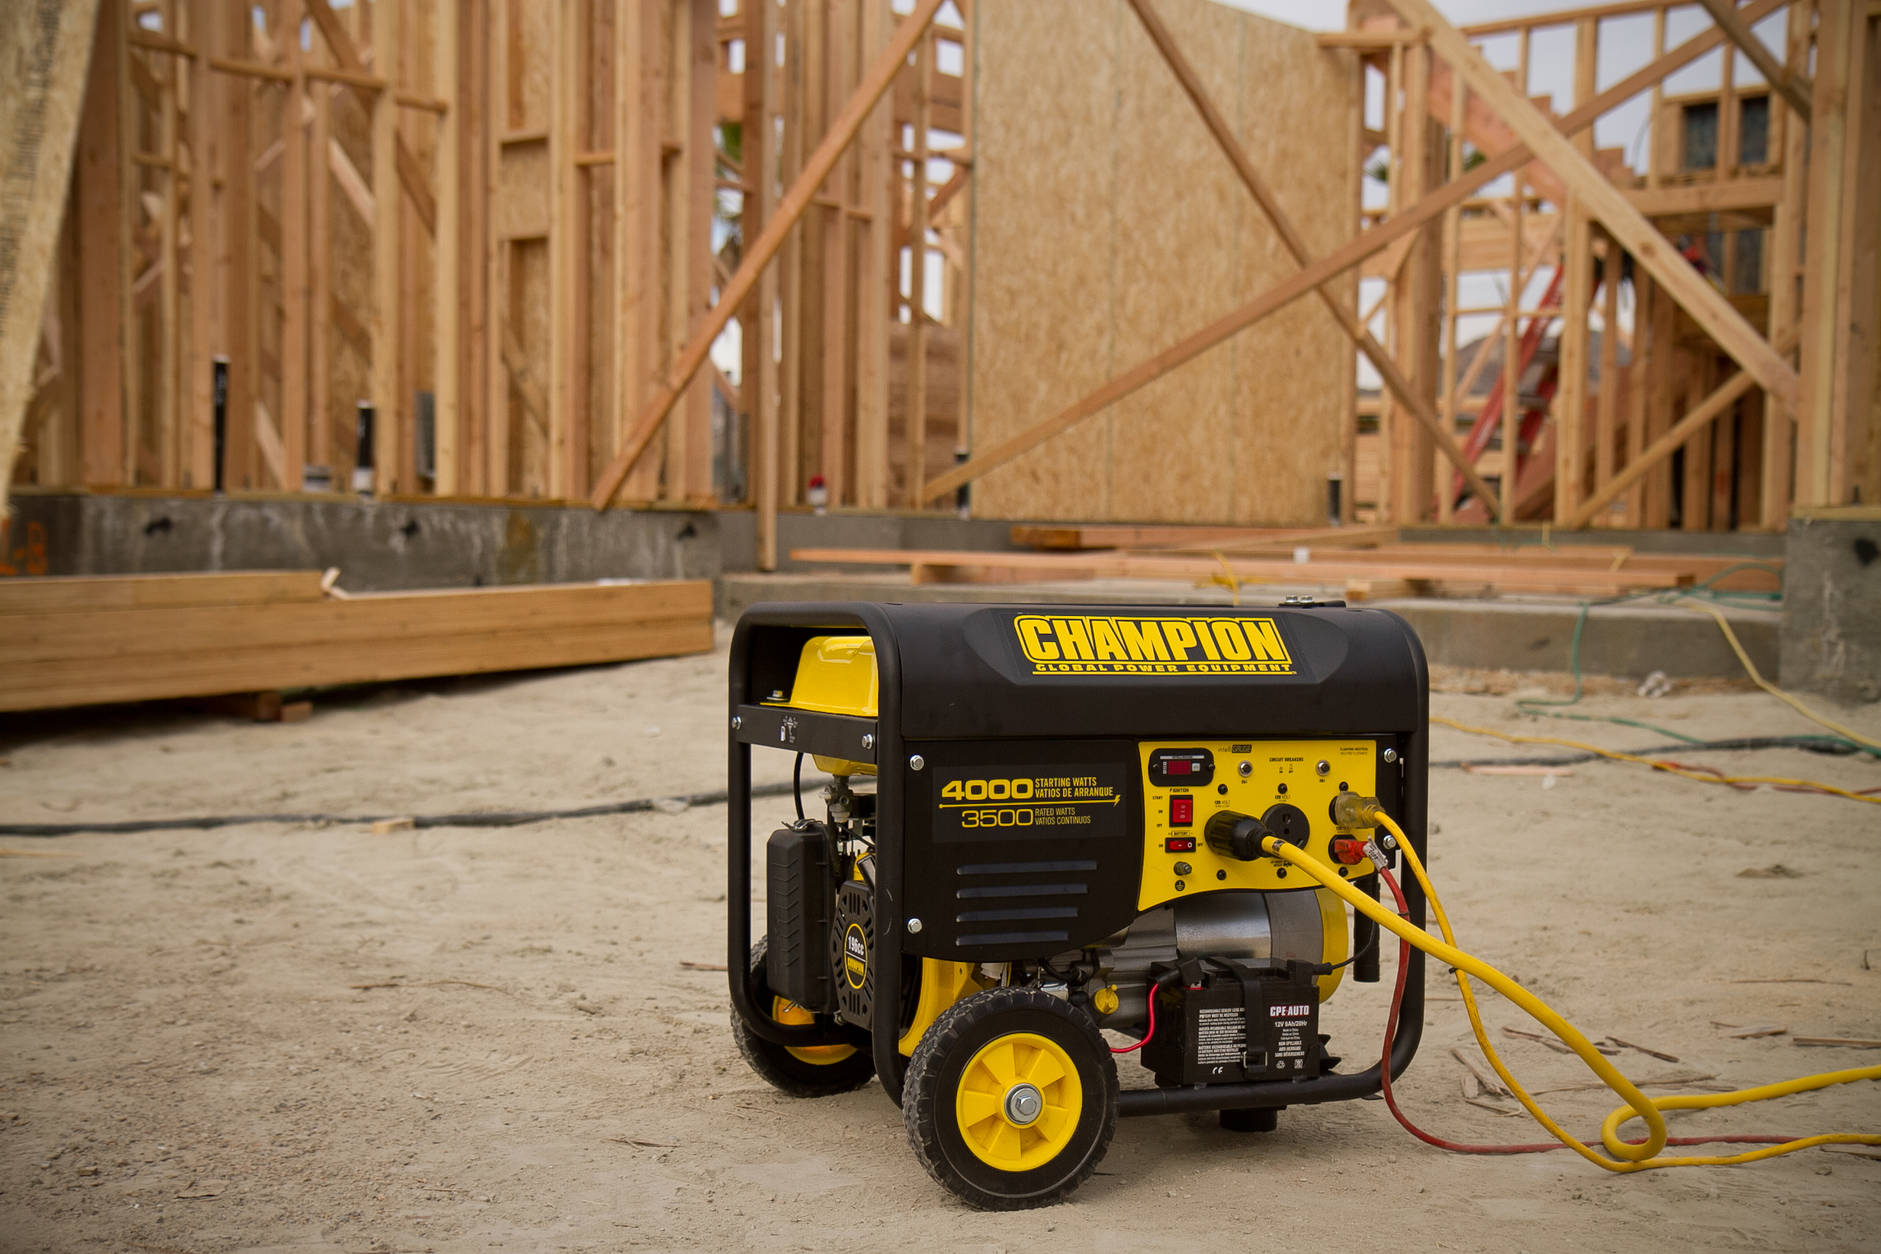 A Champion Power Equipment portable generator in use at a construction site.